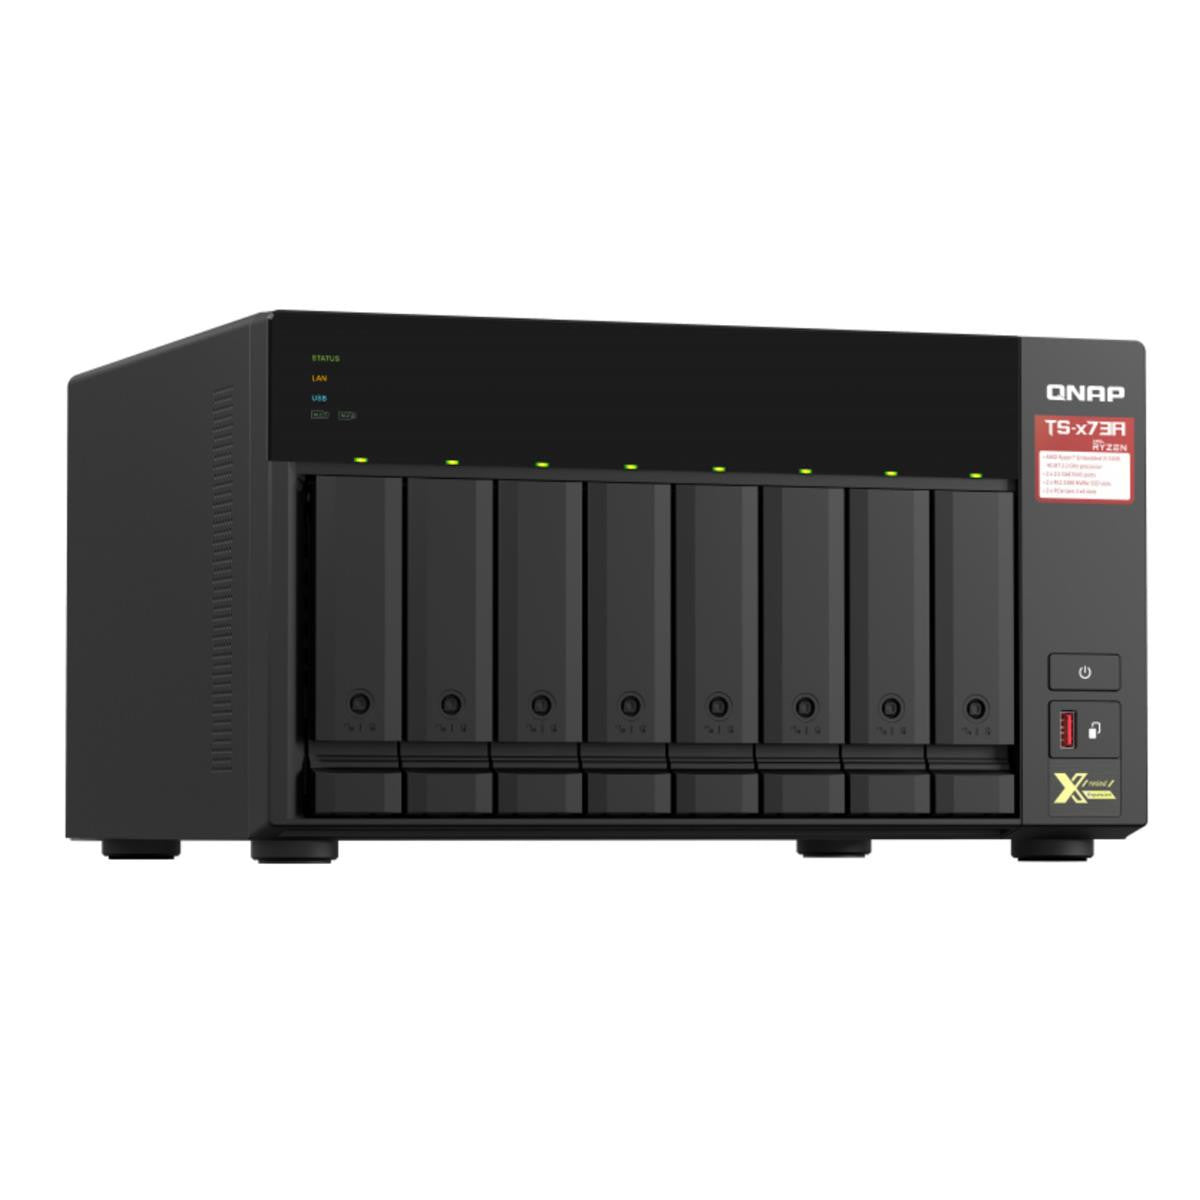 QNAP TS-873A 8-BAY NAS with 64GB DDR4 RAM and 16TB (8x2TB) Seagate Ironwolf NAS Drives Fully Assembled and Tested